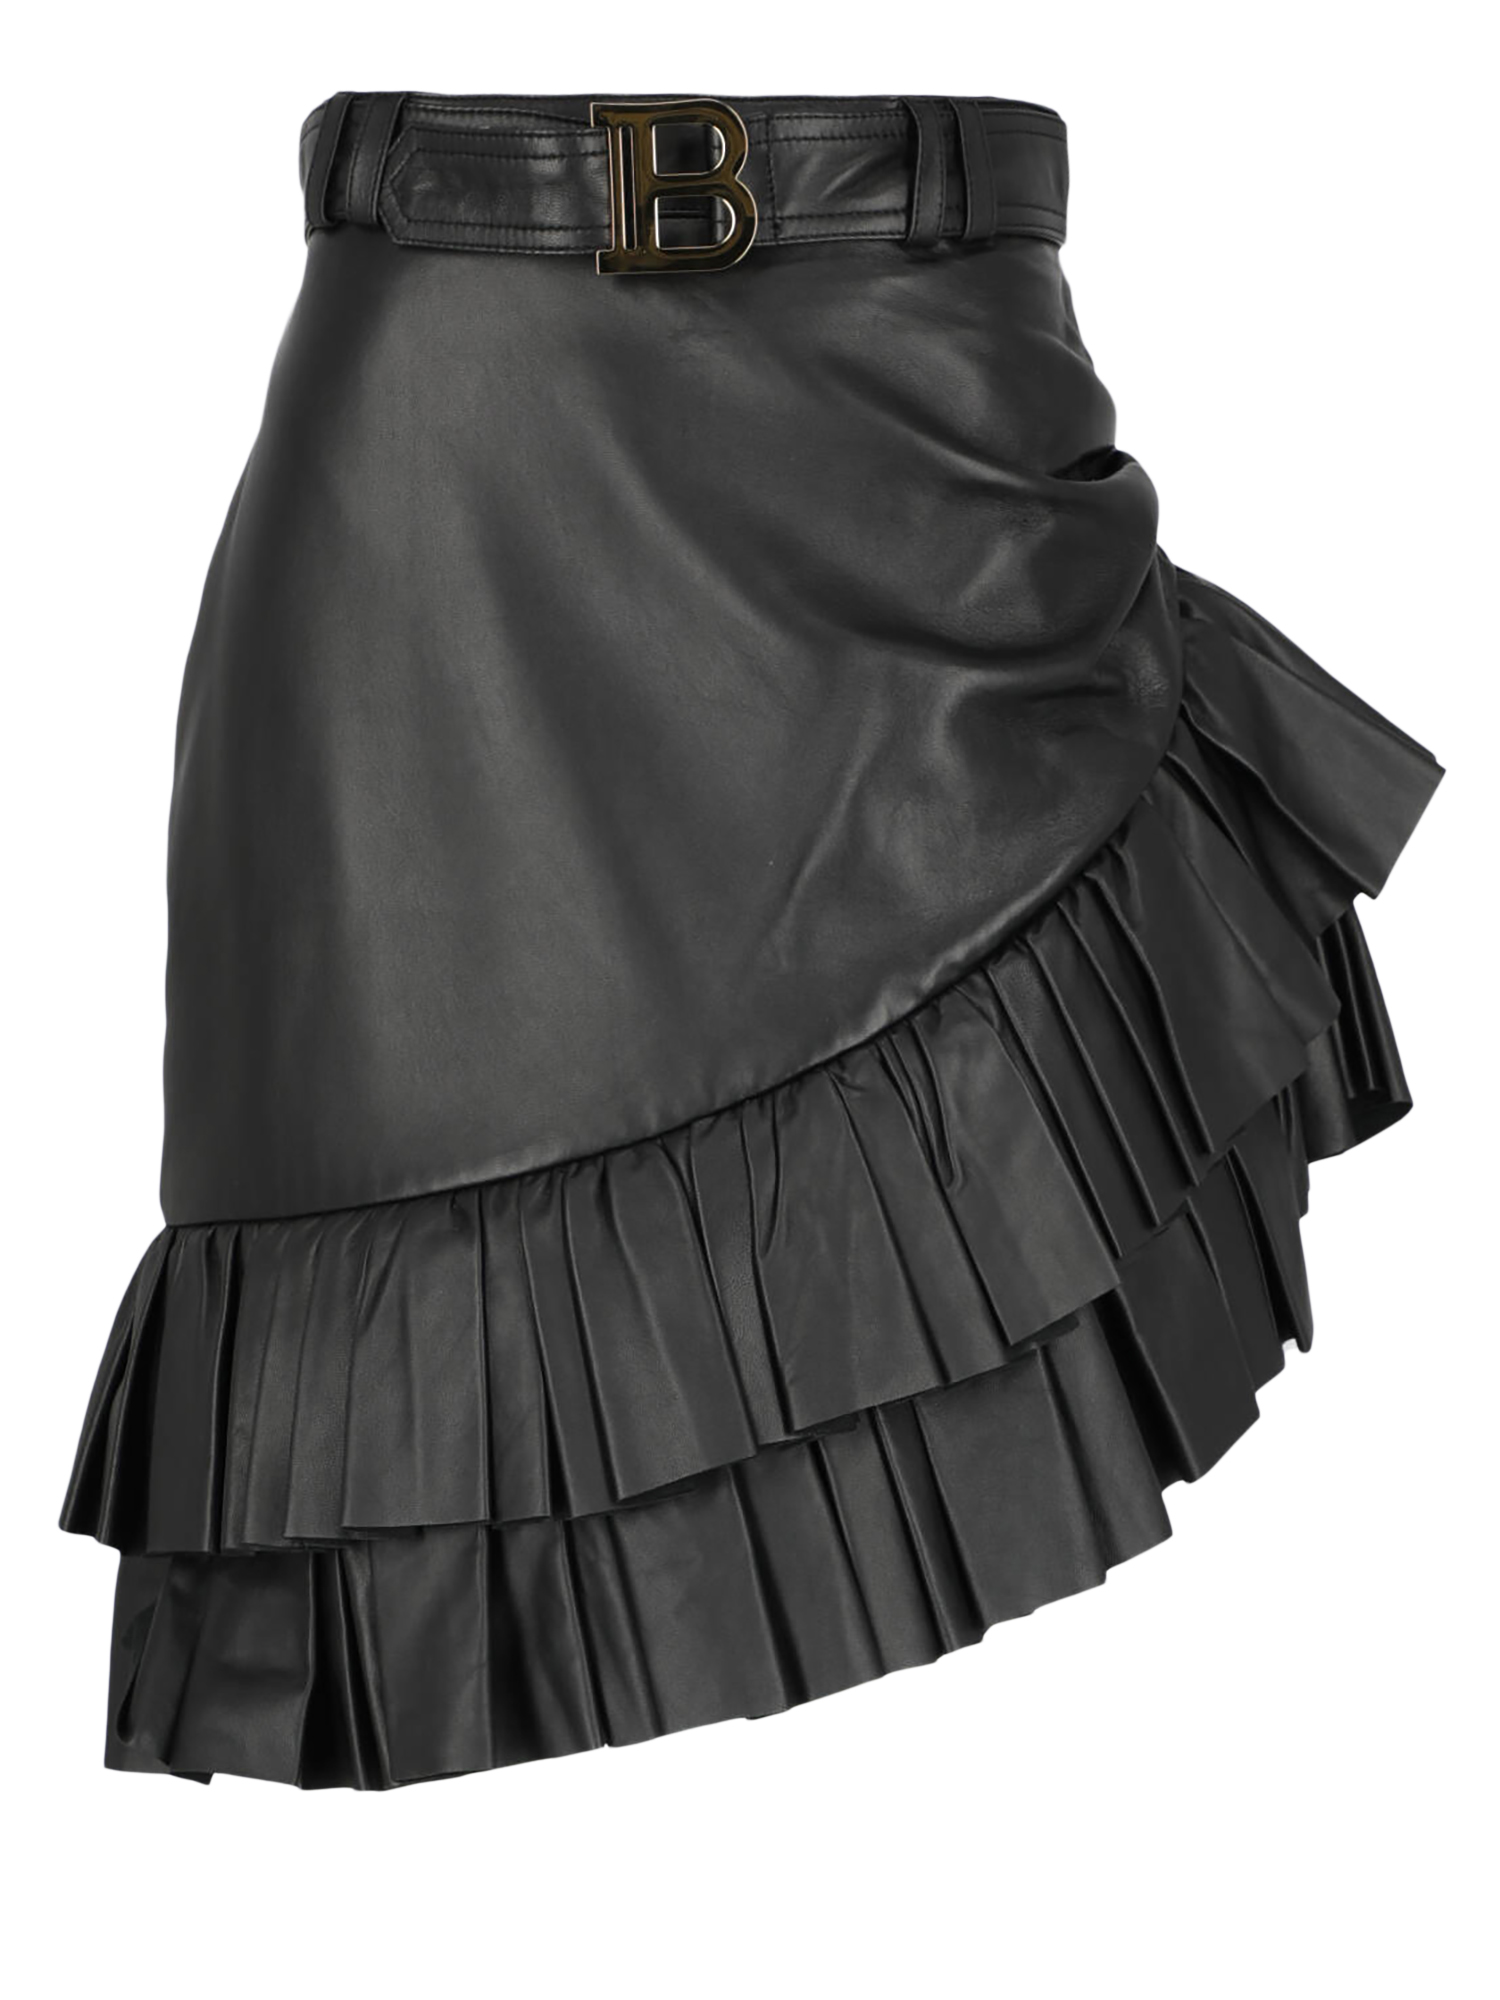 Pre-owned Balmain Women's Skirts -  - In Black Leather